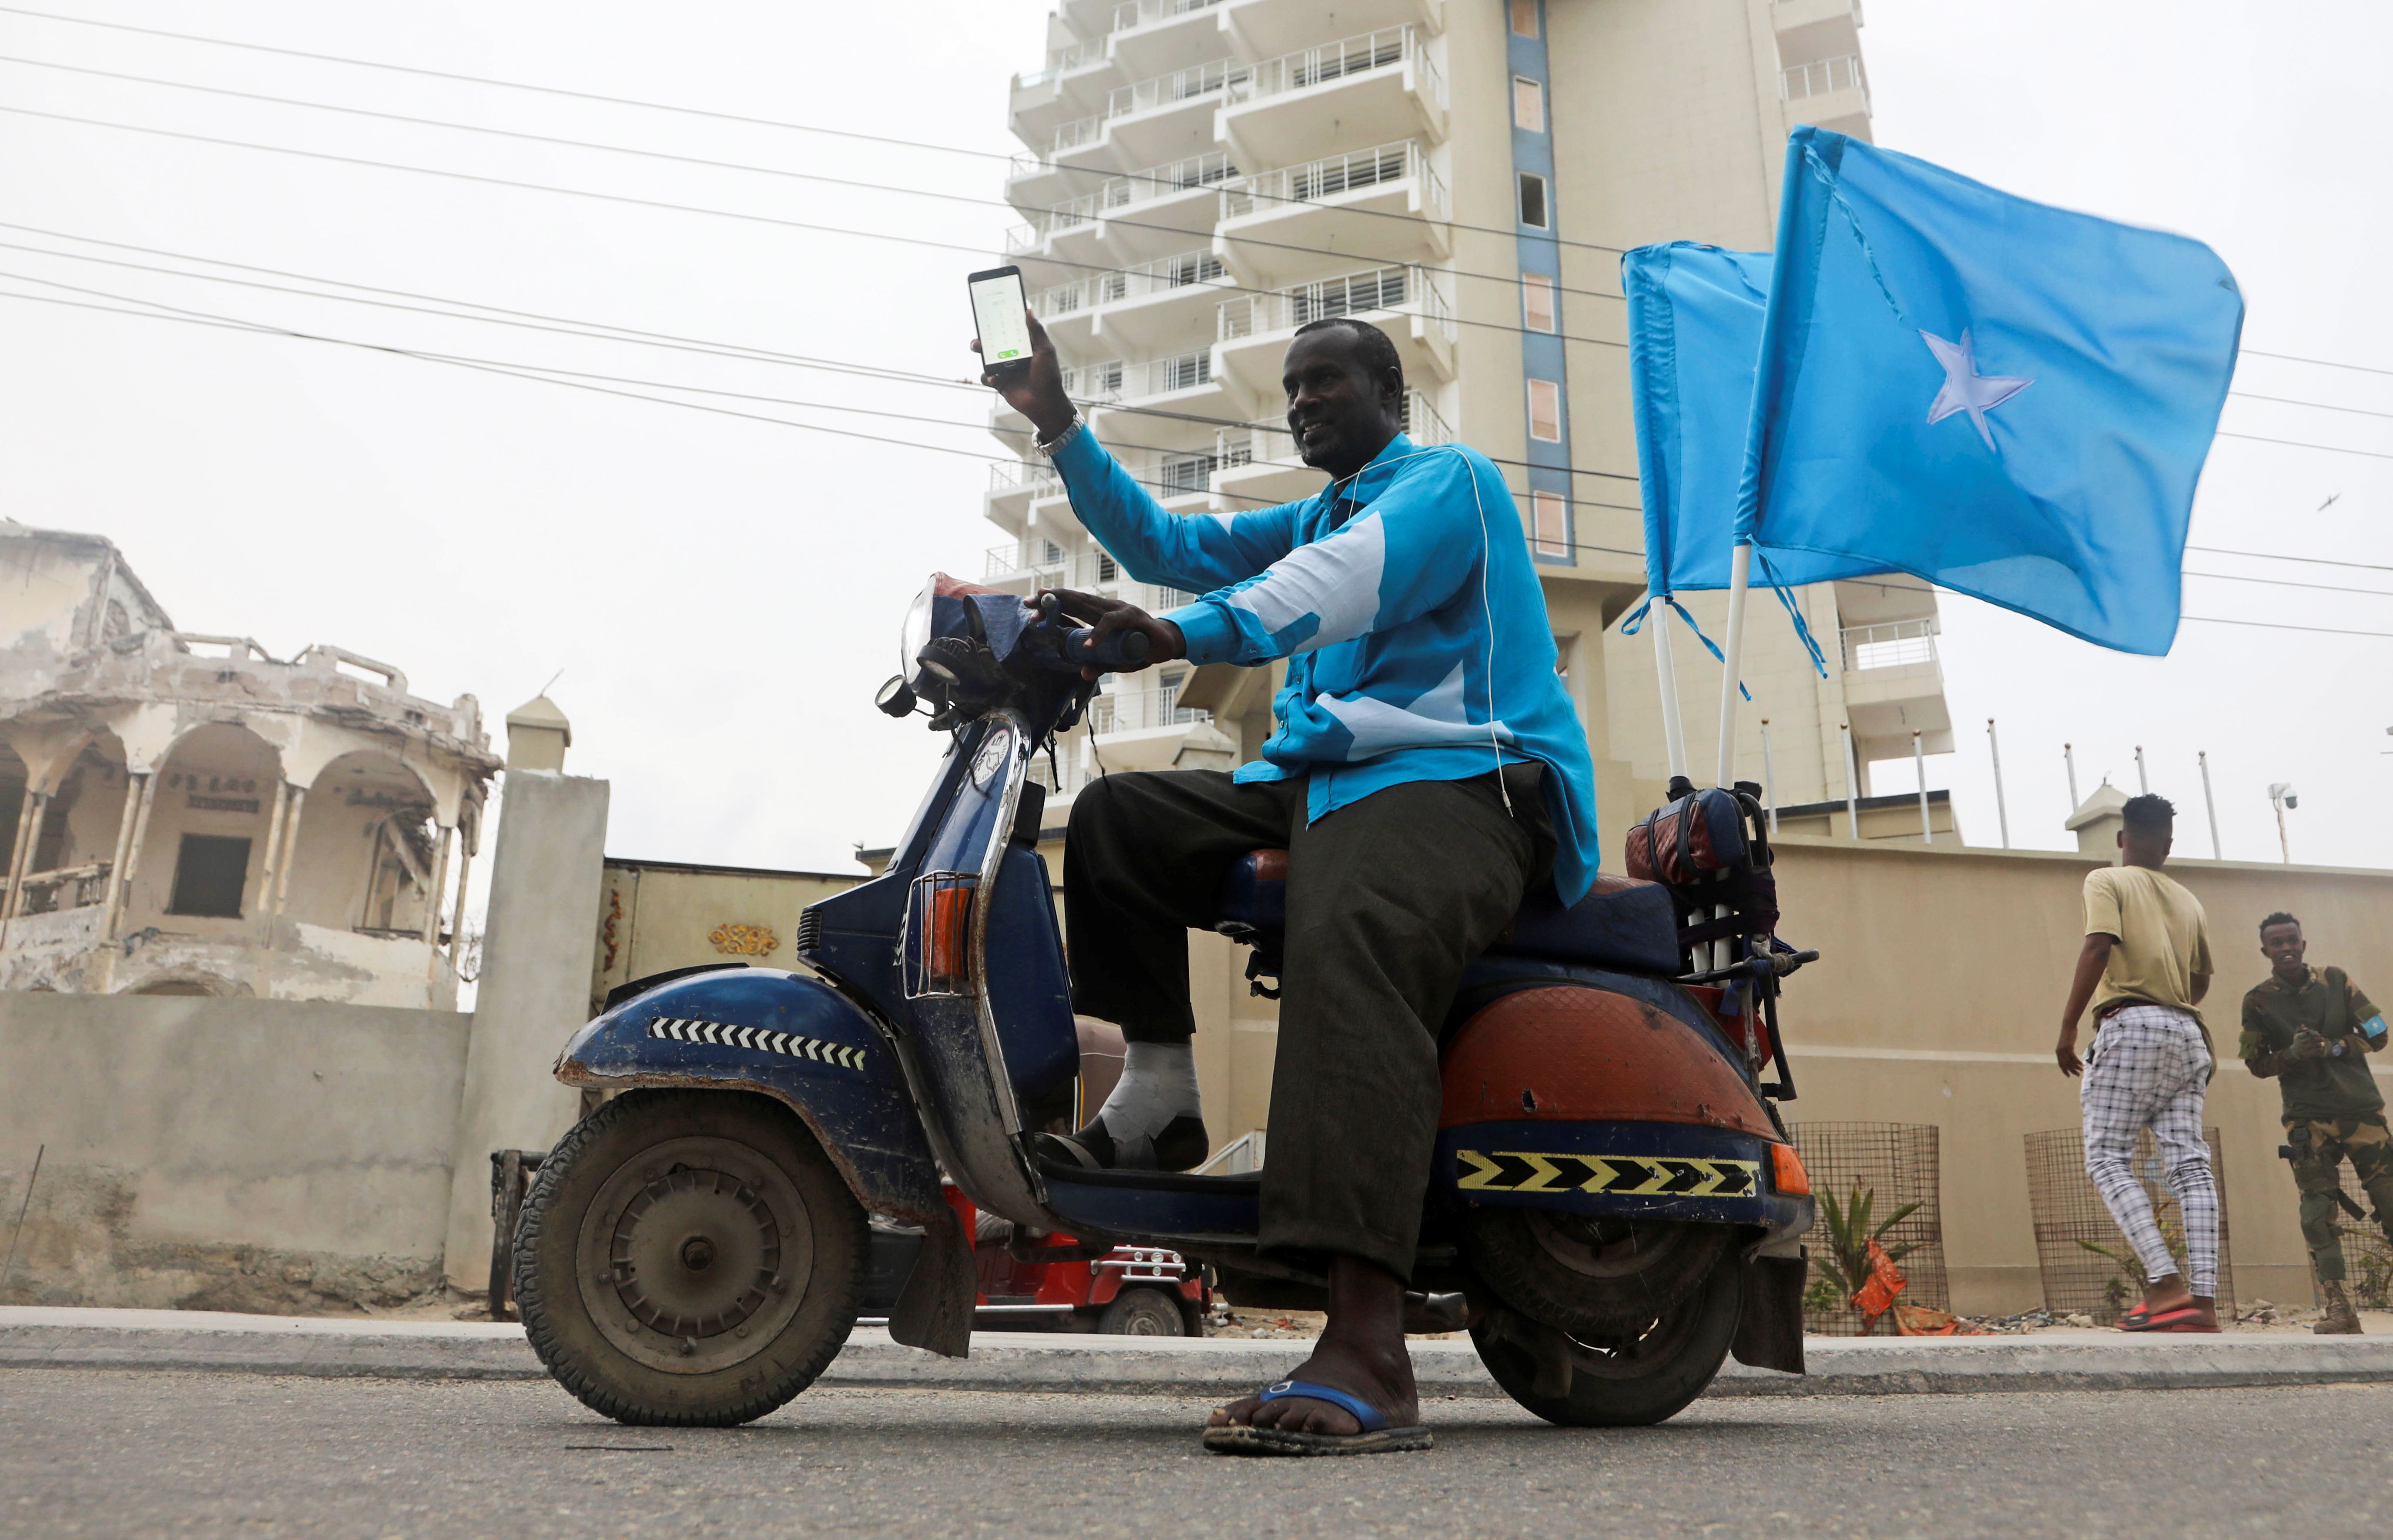 Abukar Ahmed celebrates the ruling by the International Court of Justice in Mogadishu